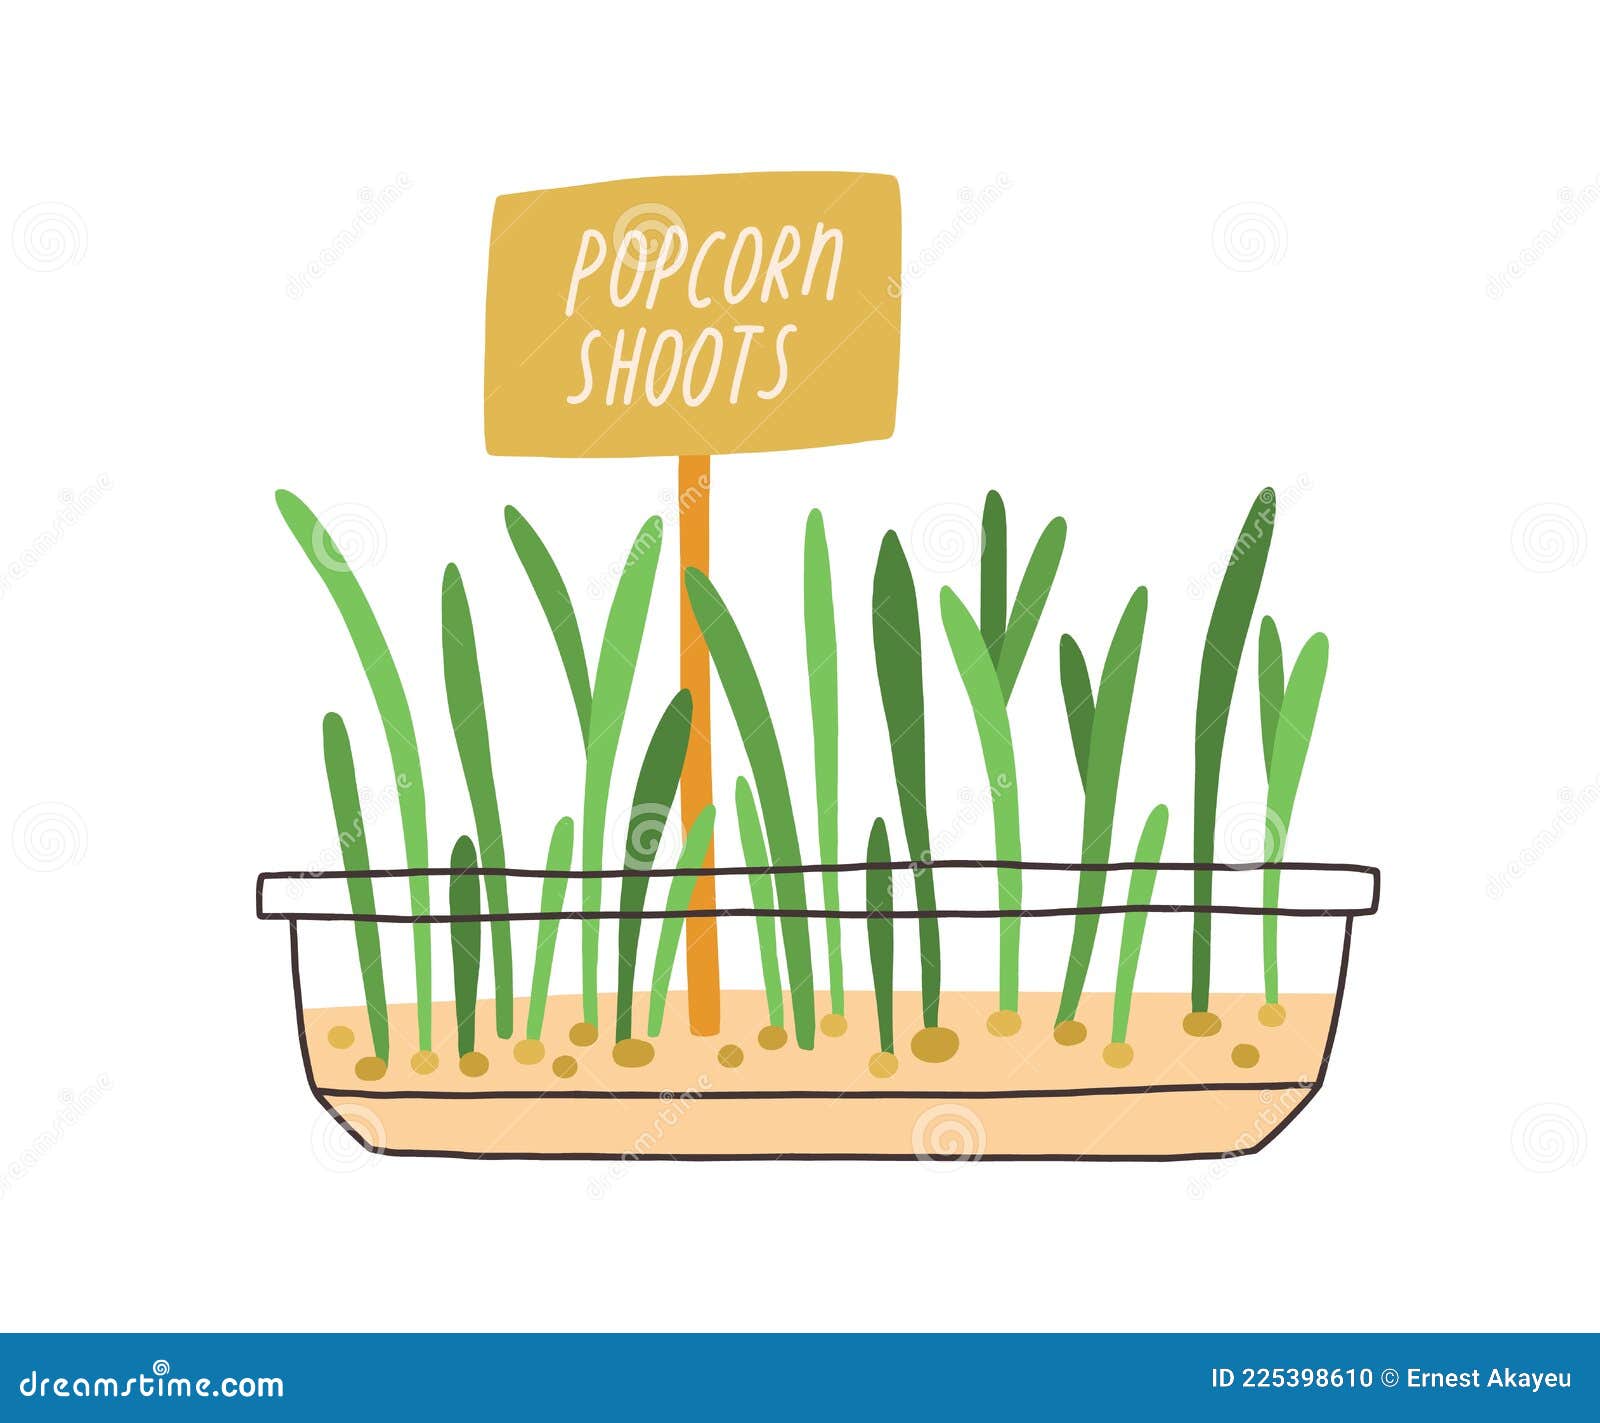 fresh popcorn shoots growing in pot. microgreens with biomarker in container. micro greens with plant label. green